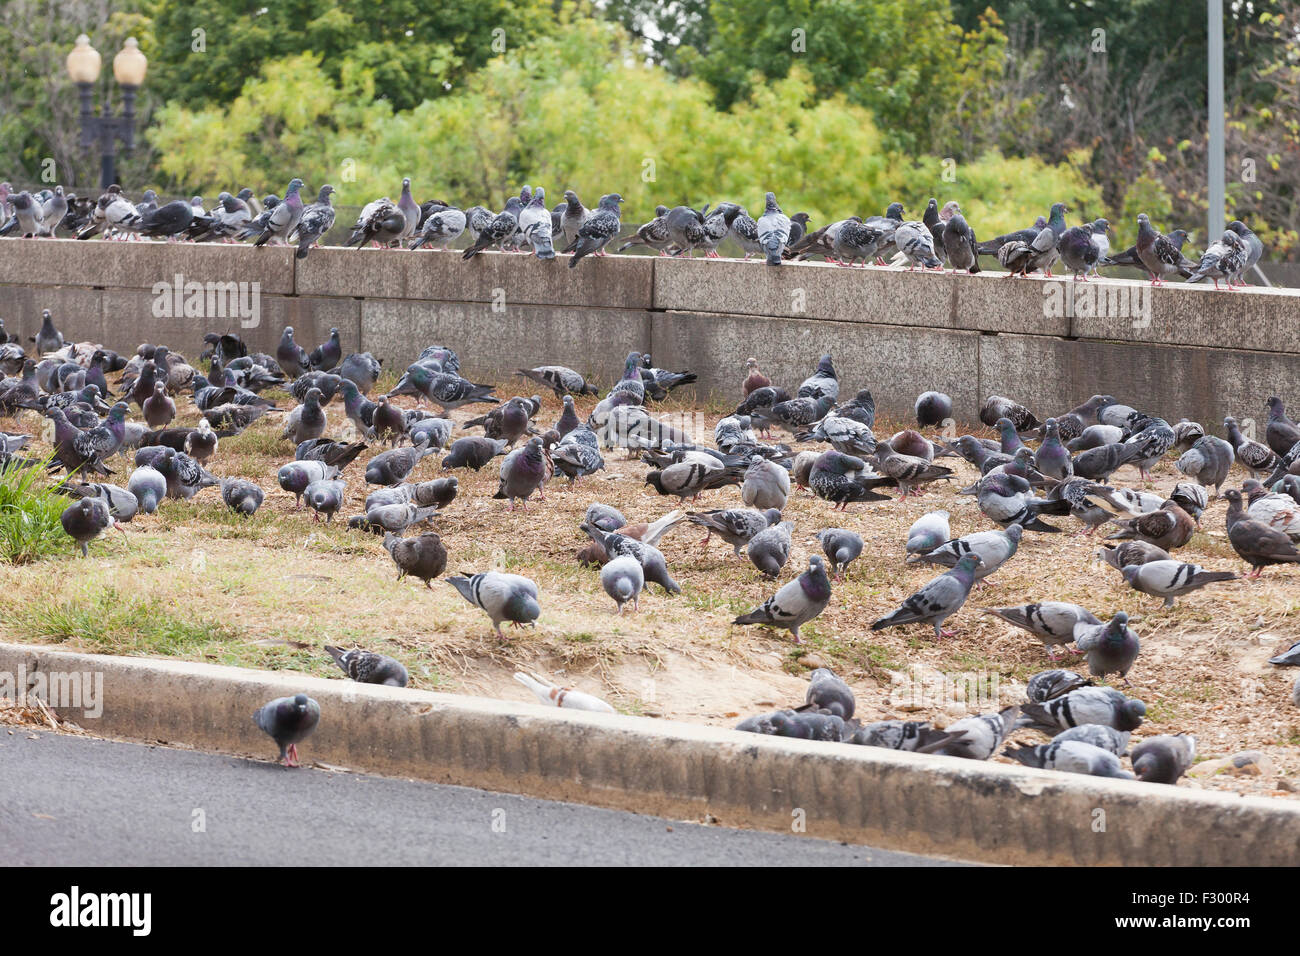 Large flock of pigeons on side of road - USA Stock Photo